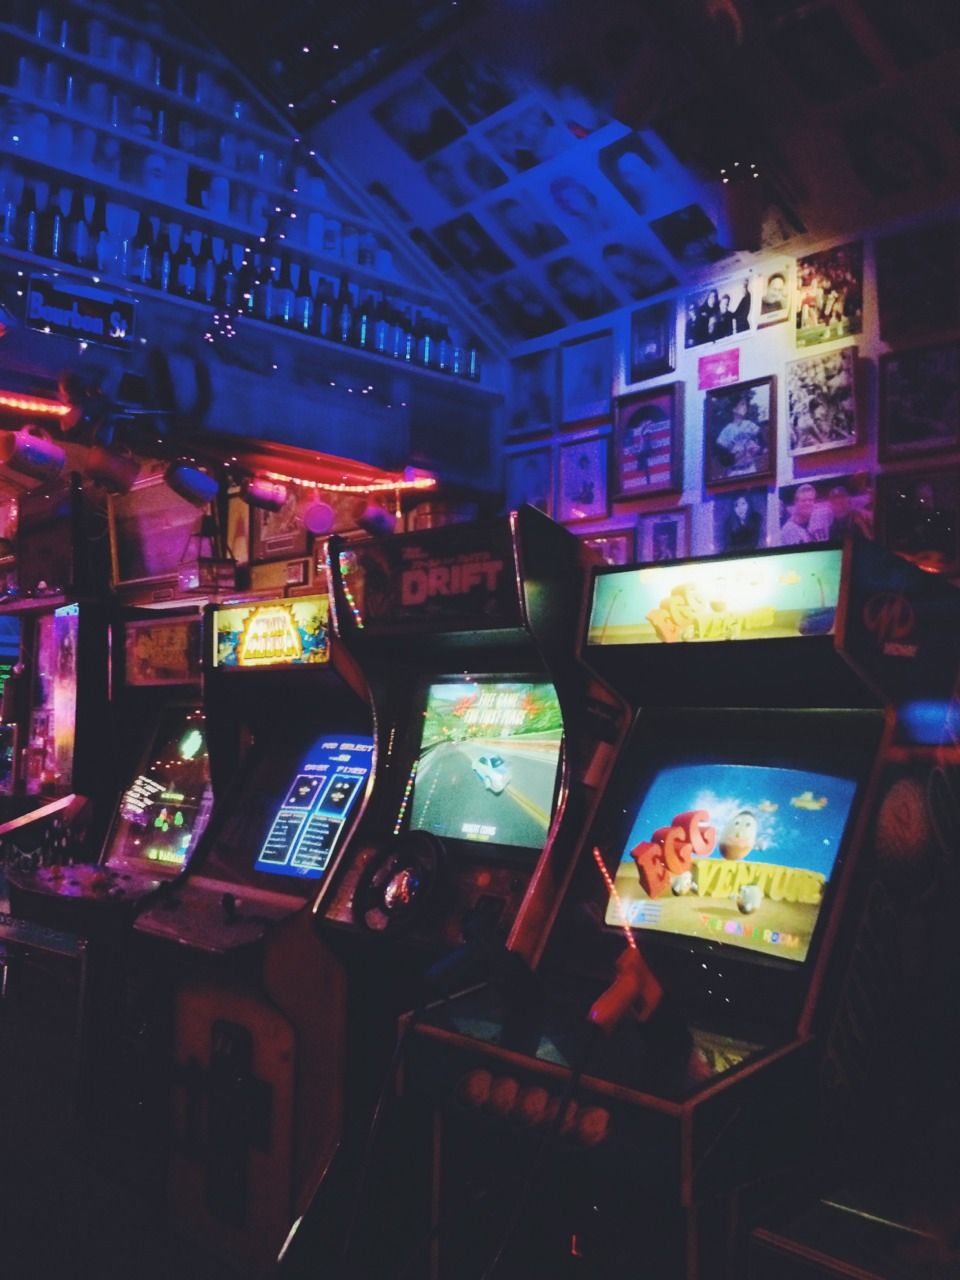 A row of video games lit up in a dark room. - Arcade